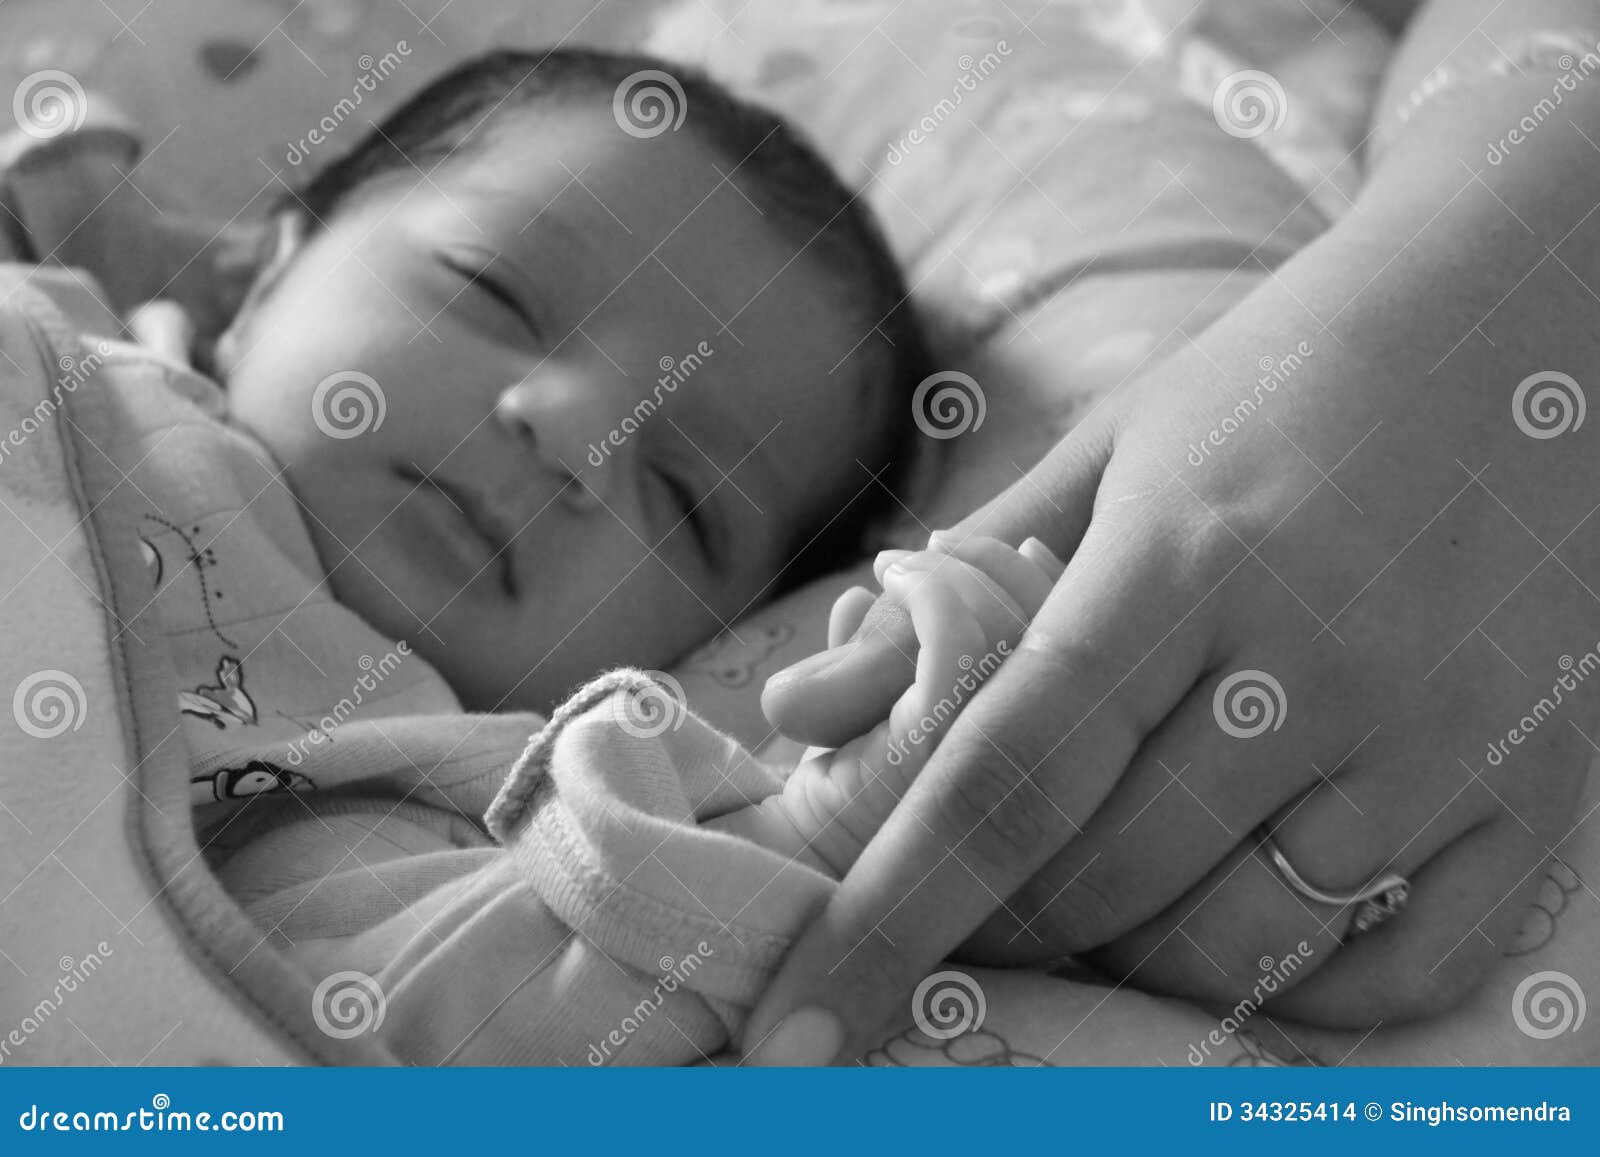 new bond of baby and mother; bonding and holding for first time